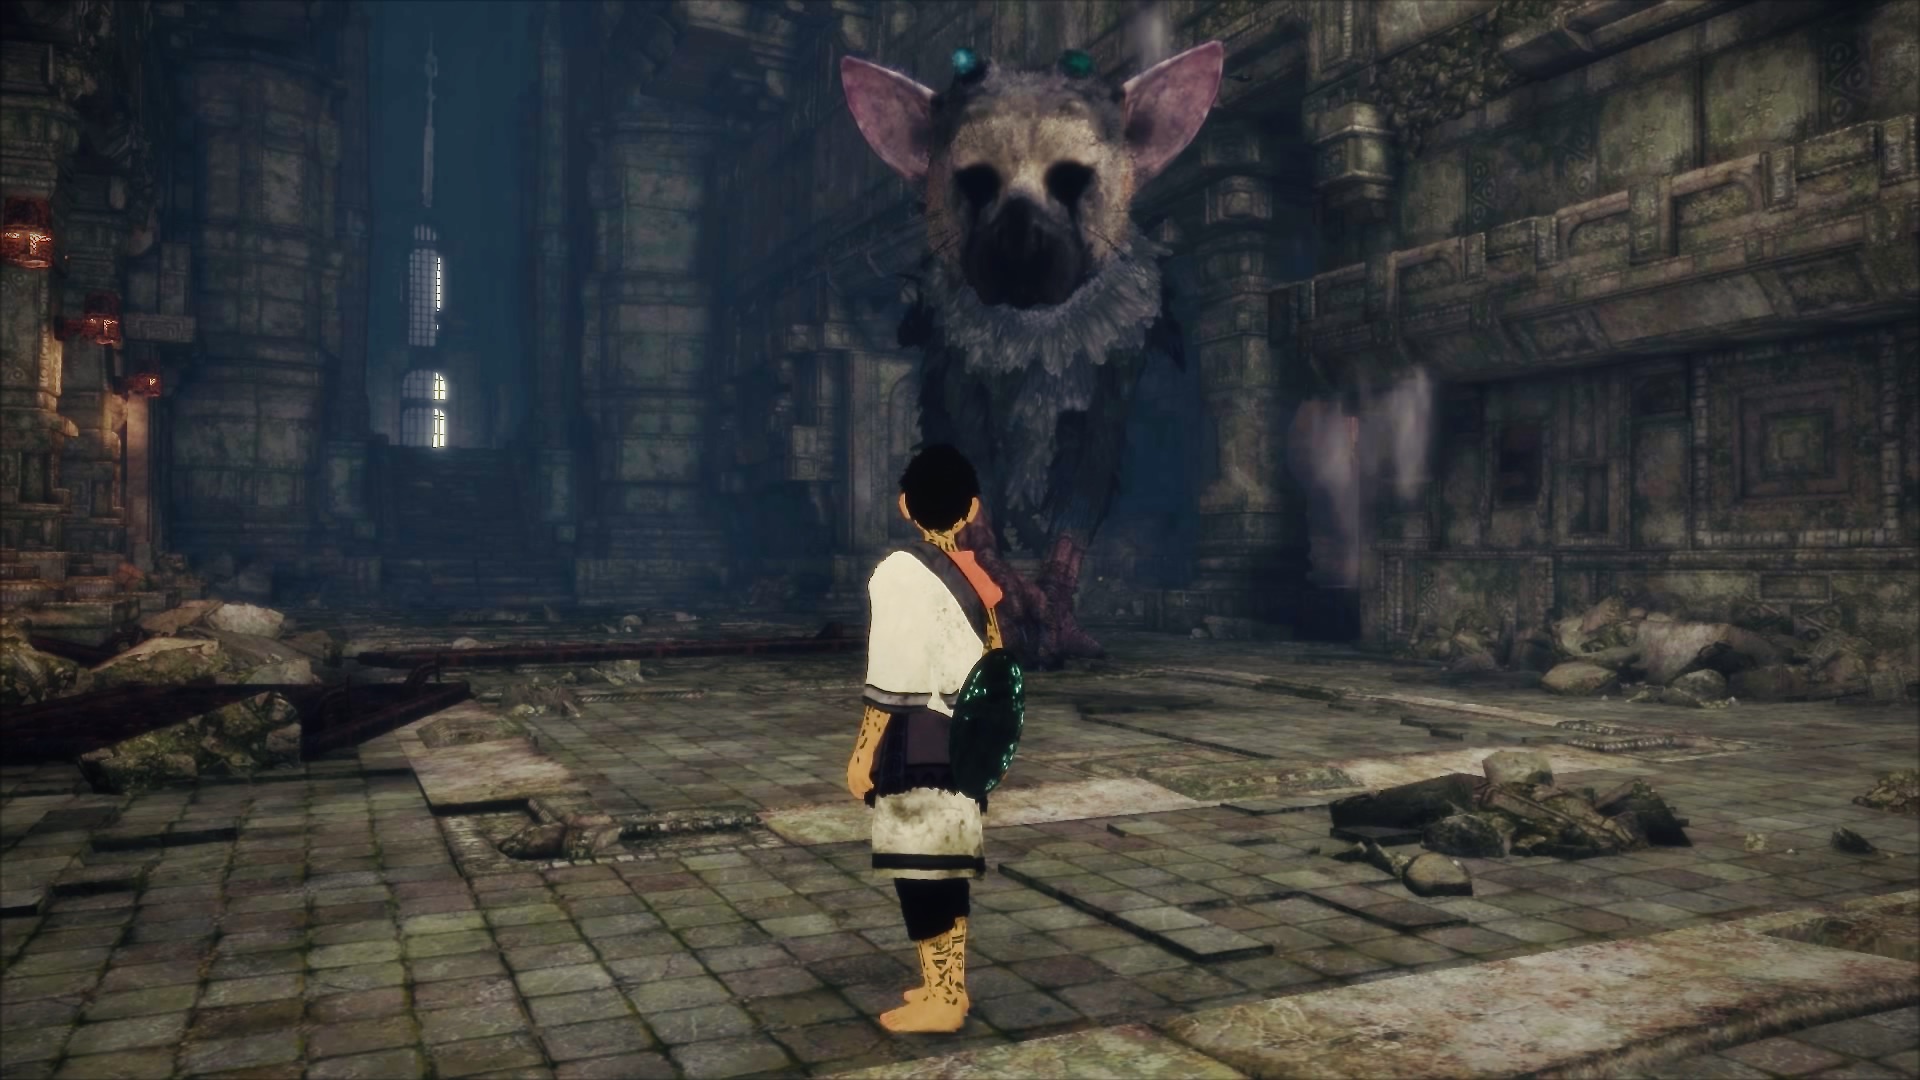 General 1920x1080 The Last Guardian video games screen shot Team Ico video game characters